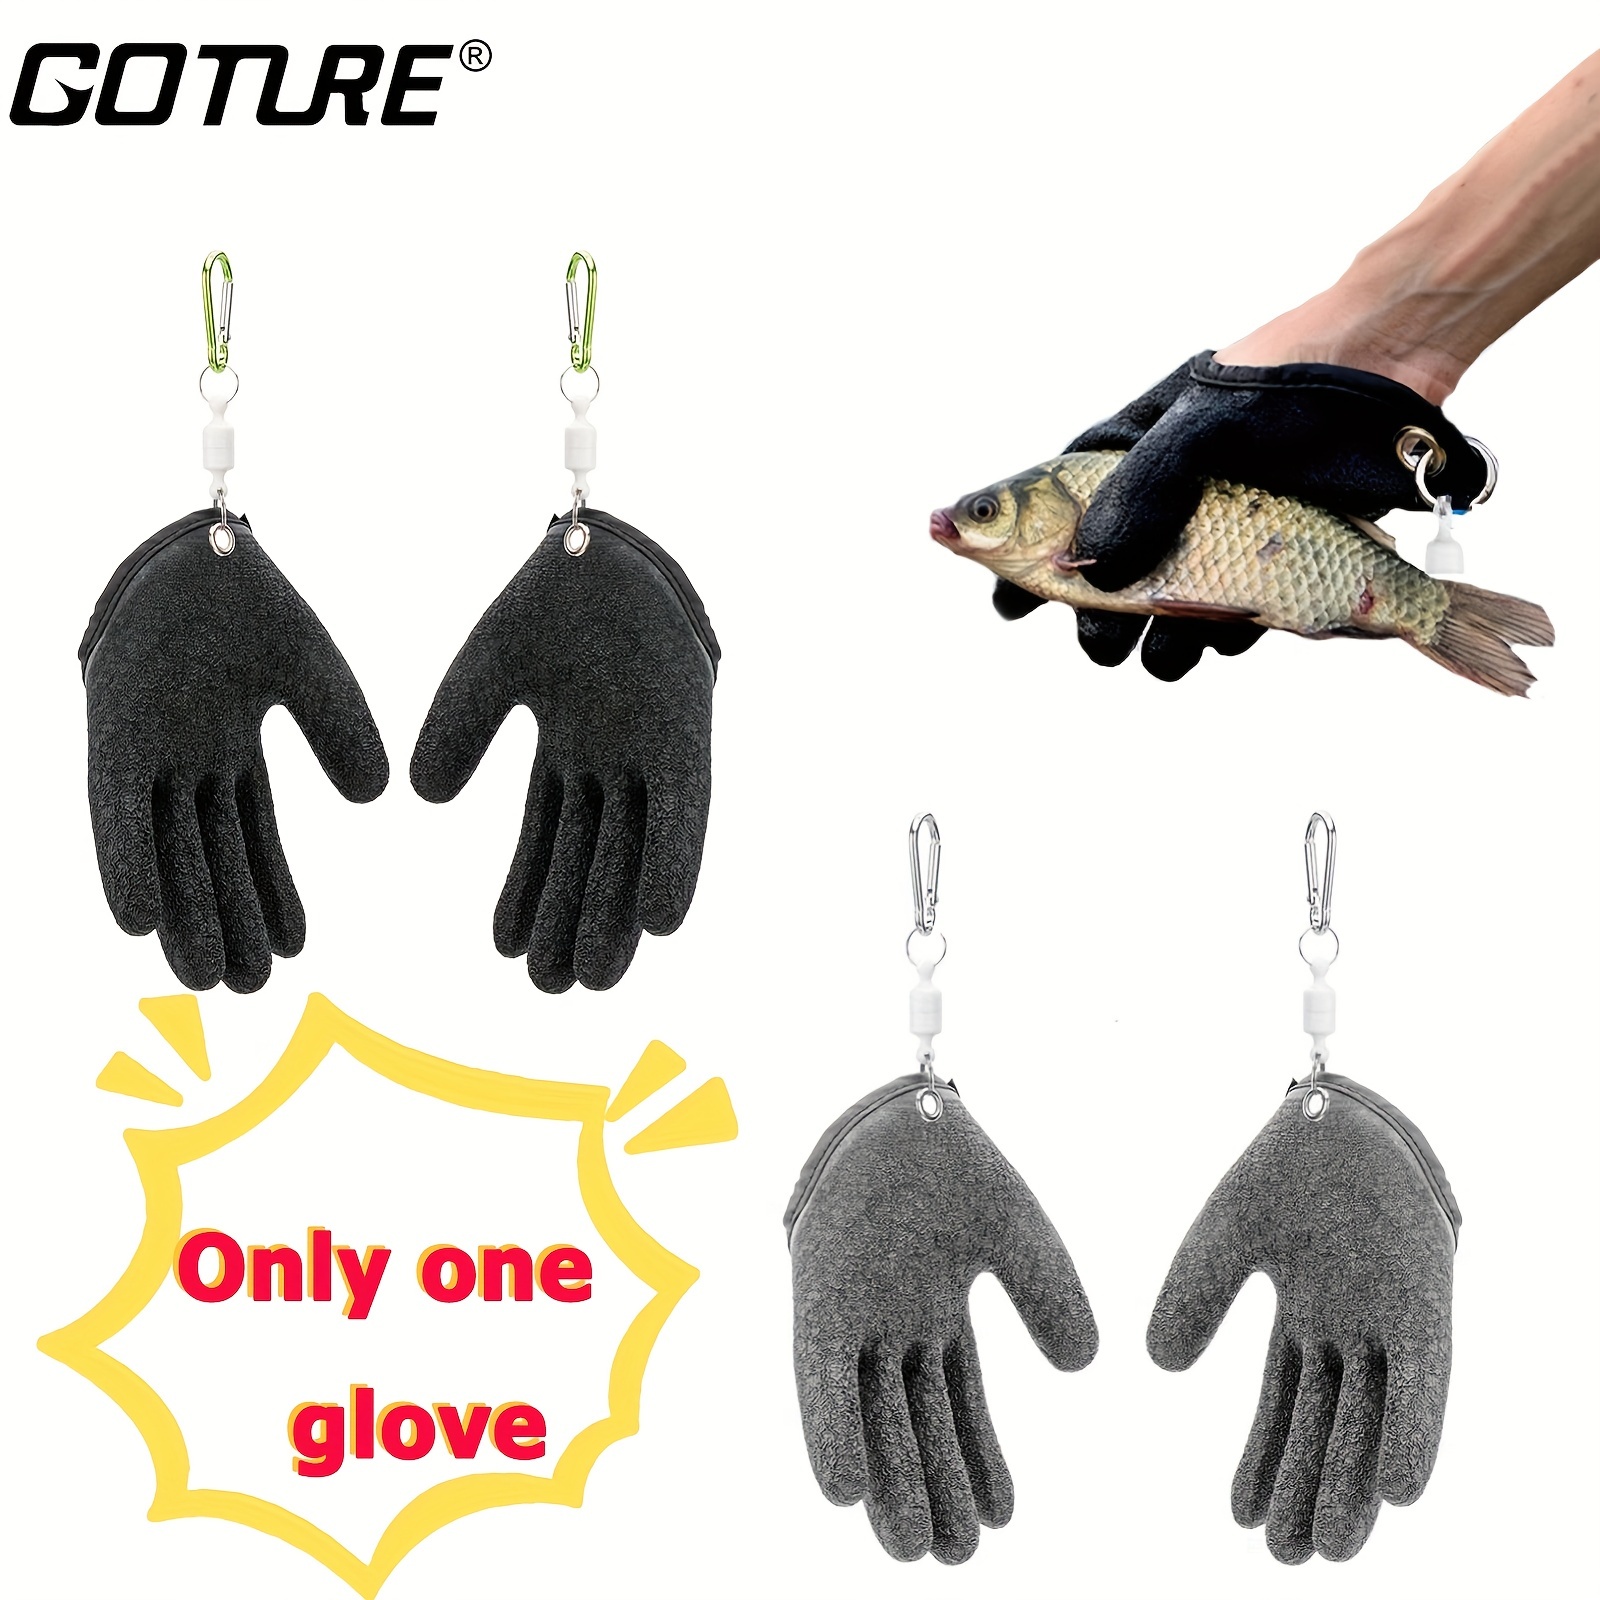 

1pc Goture Waterproof Fish Cleaning Gloves With Magnetic Buckle - Textured Handle For Secure Grip - 1 Size Fits Most - Random Buckle Color